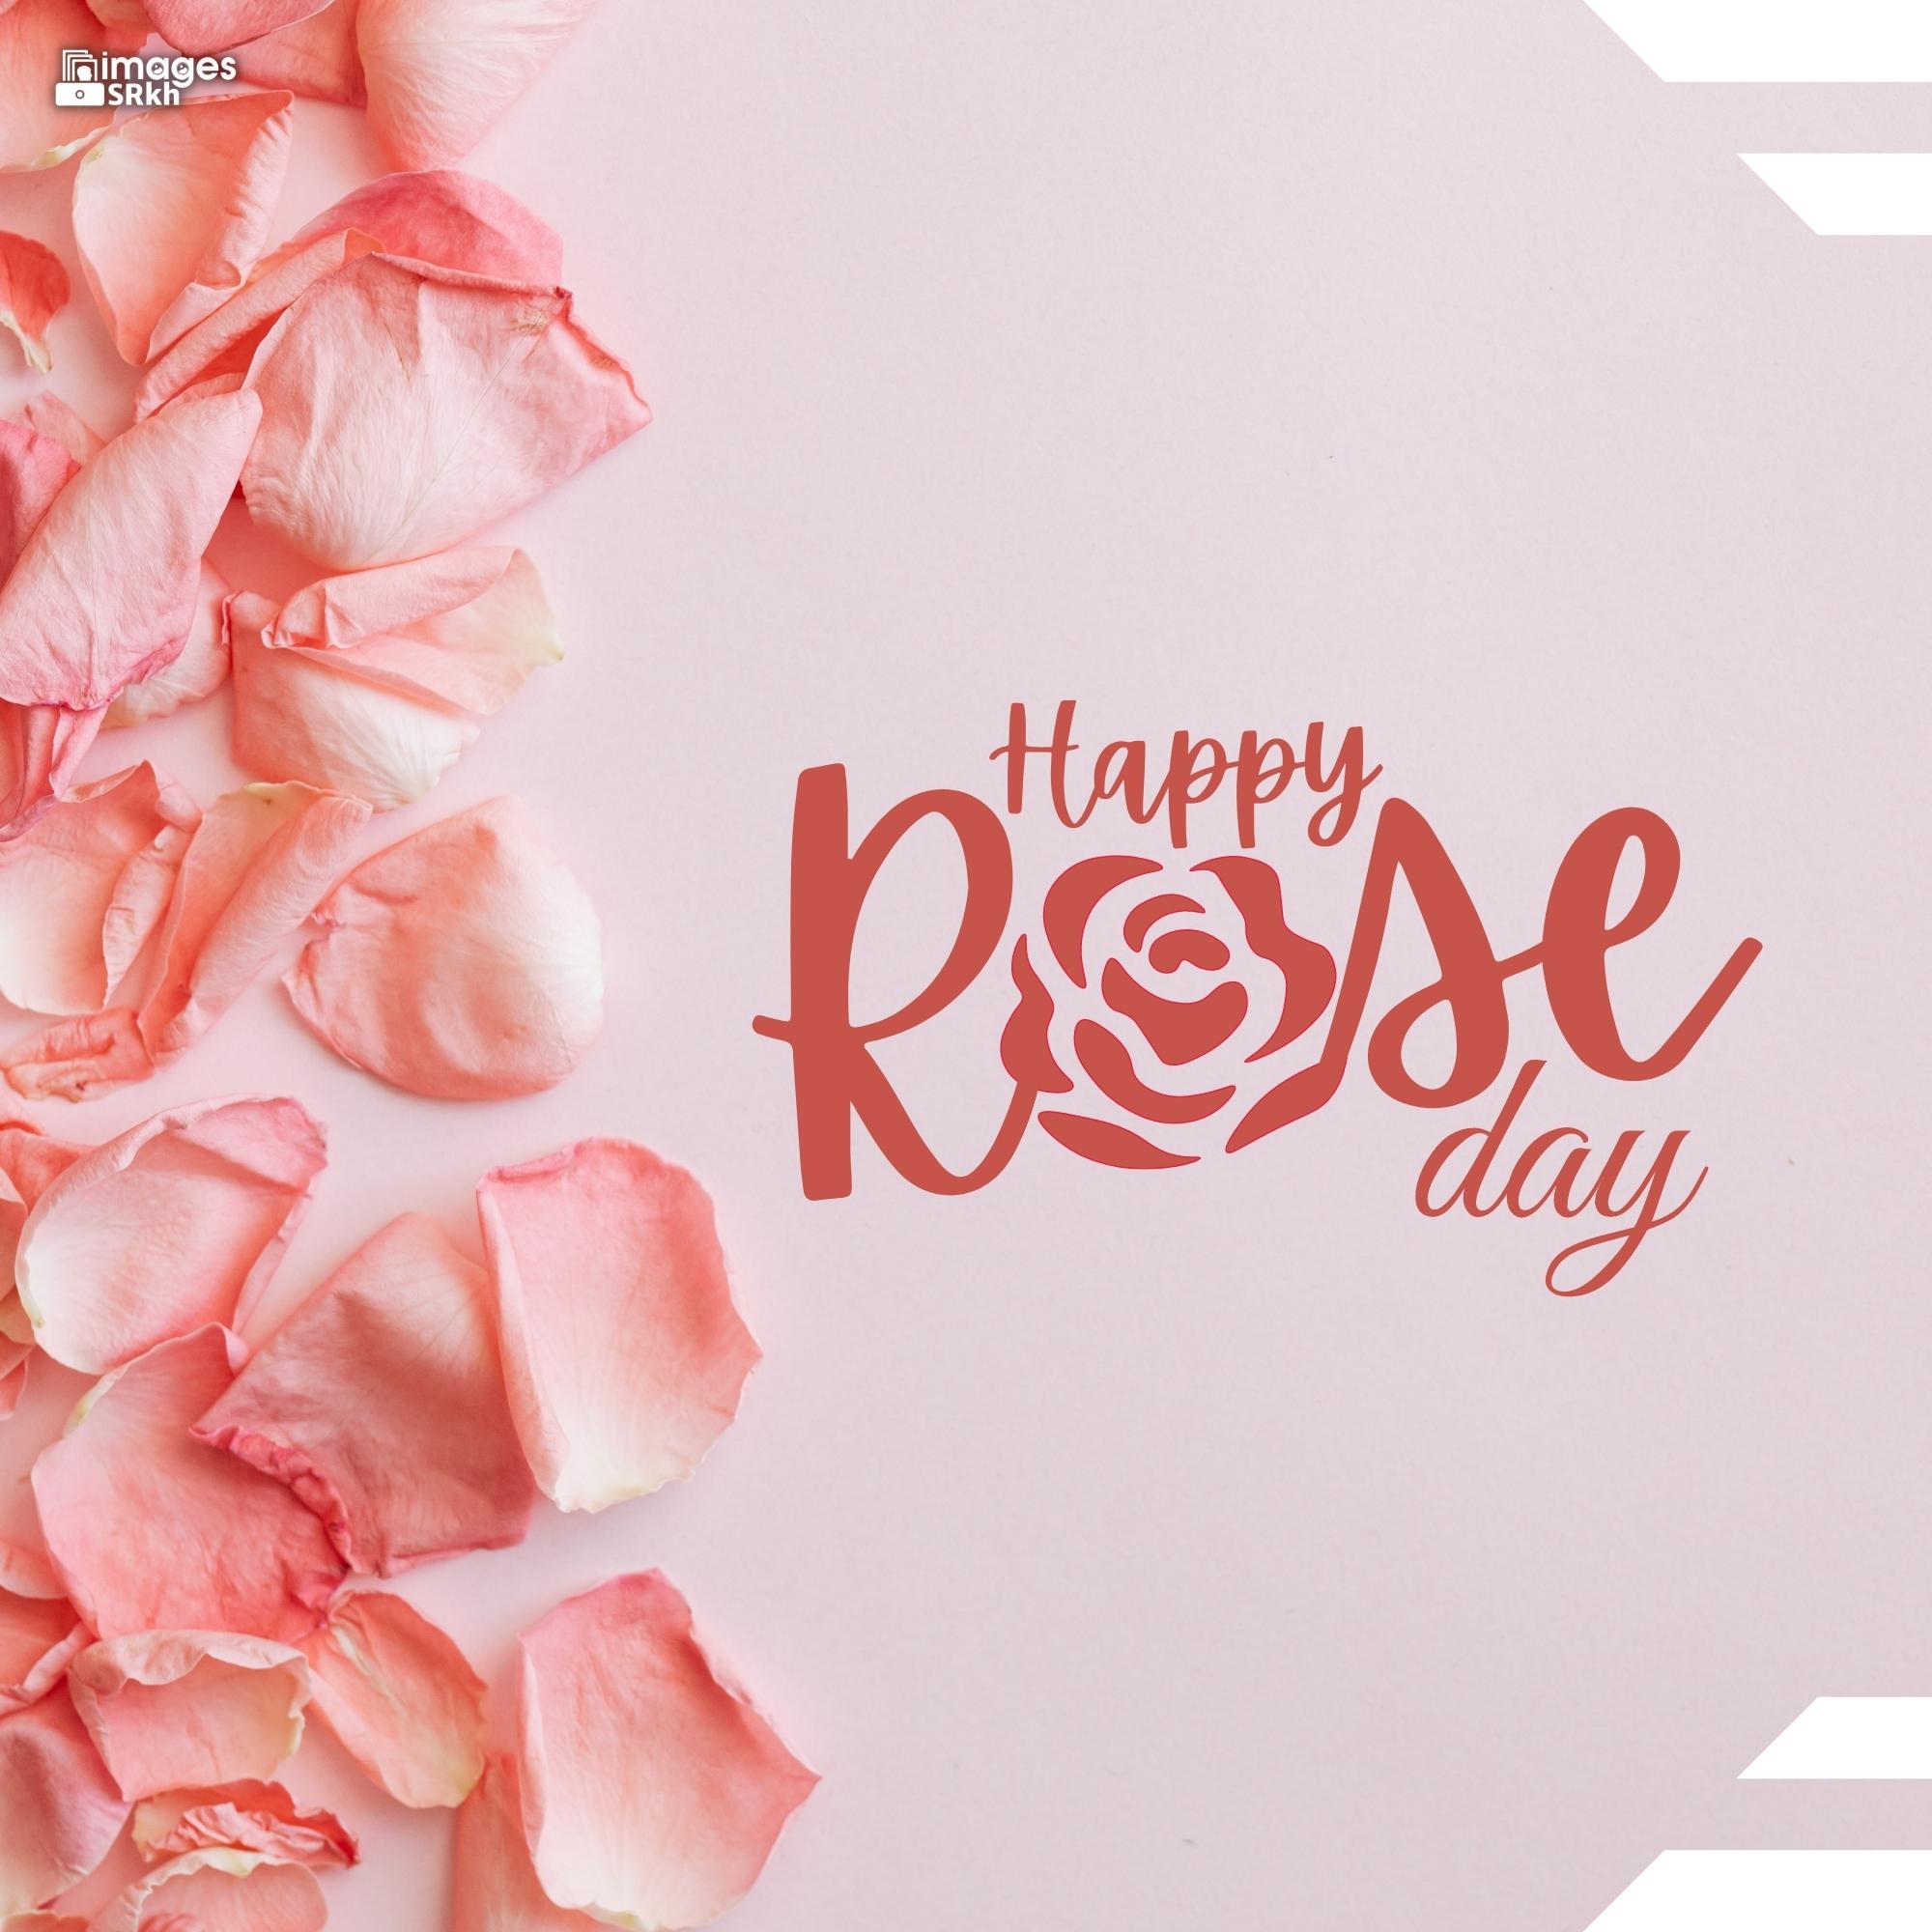 Happy Rose Day Image Hd Download (13)